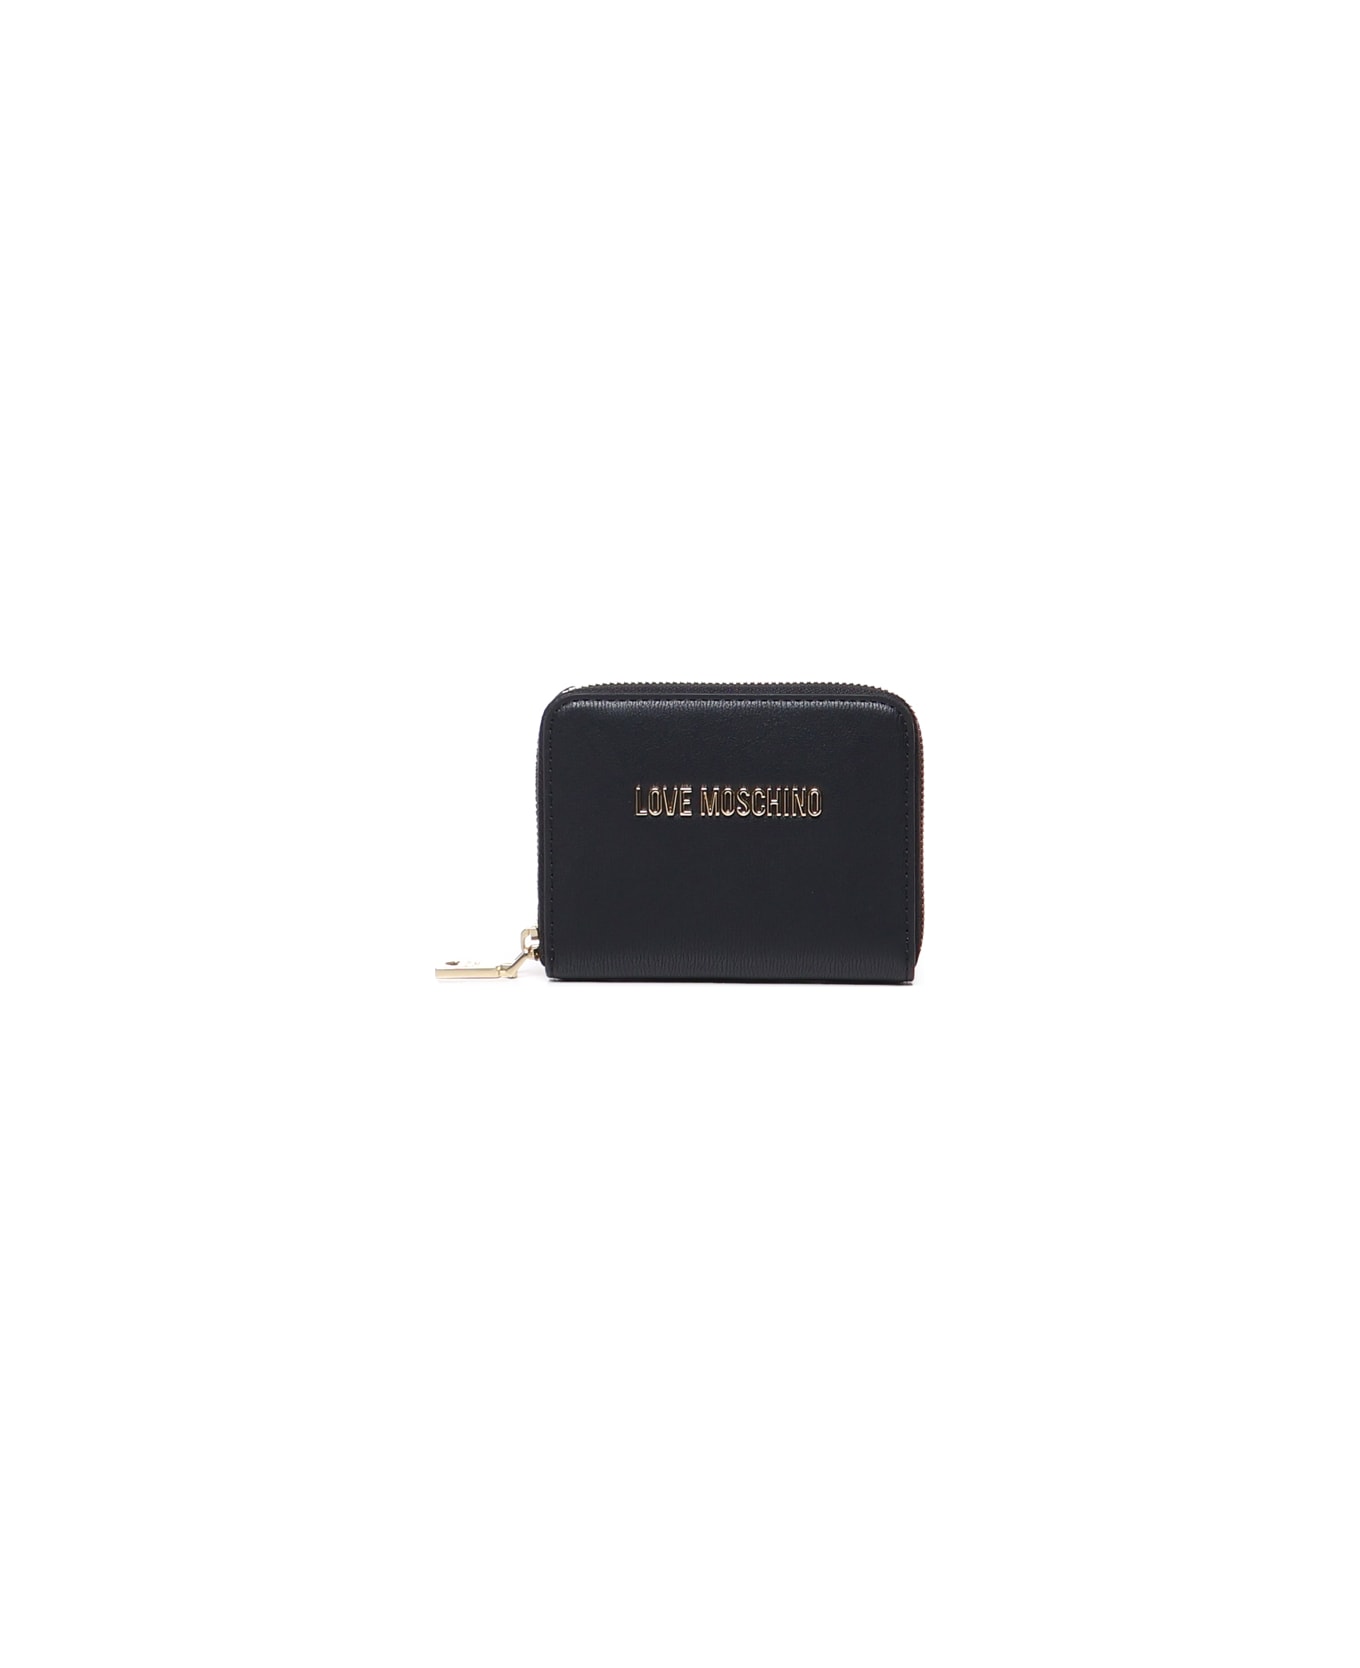 Love Moschino Small Wallet With Logo - Black 財布